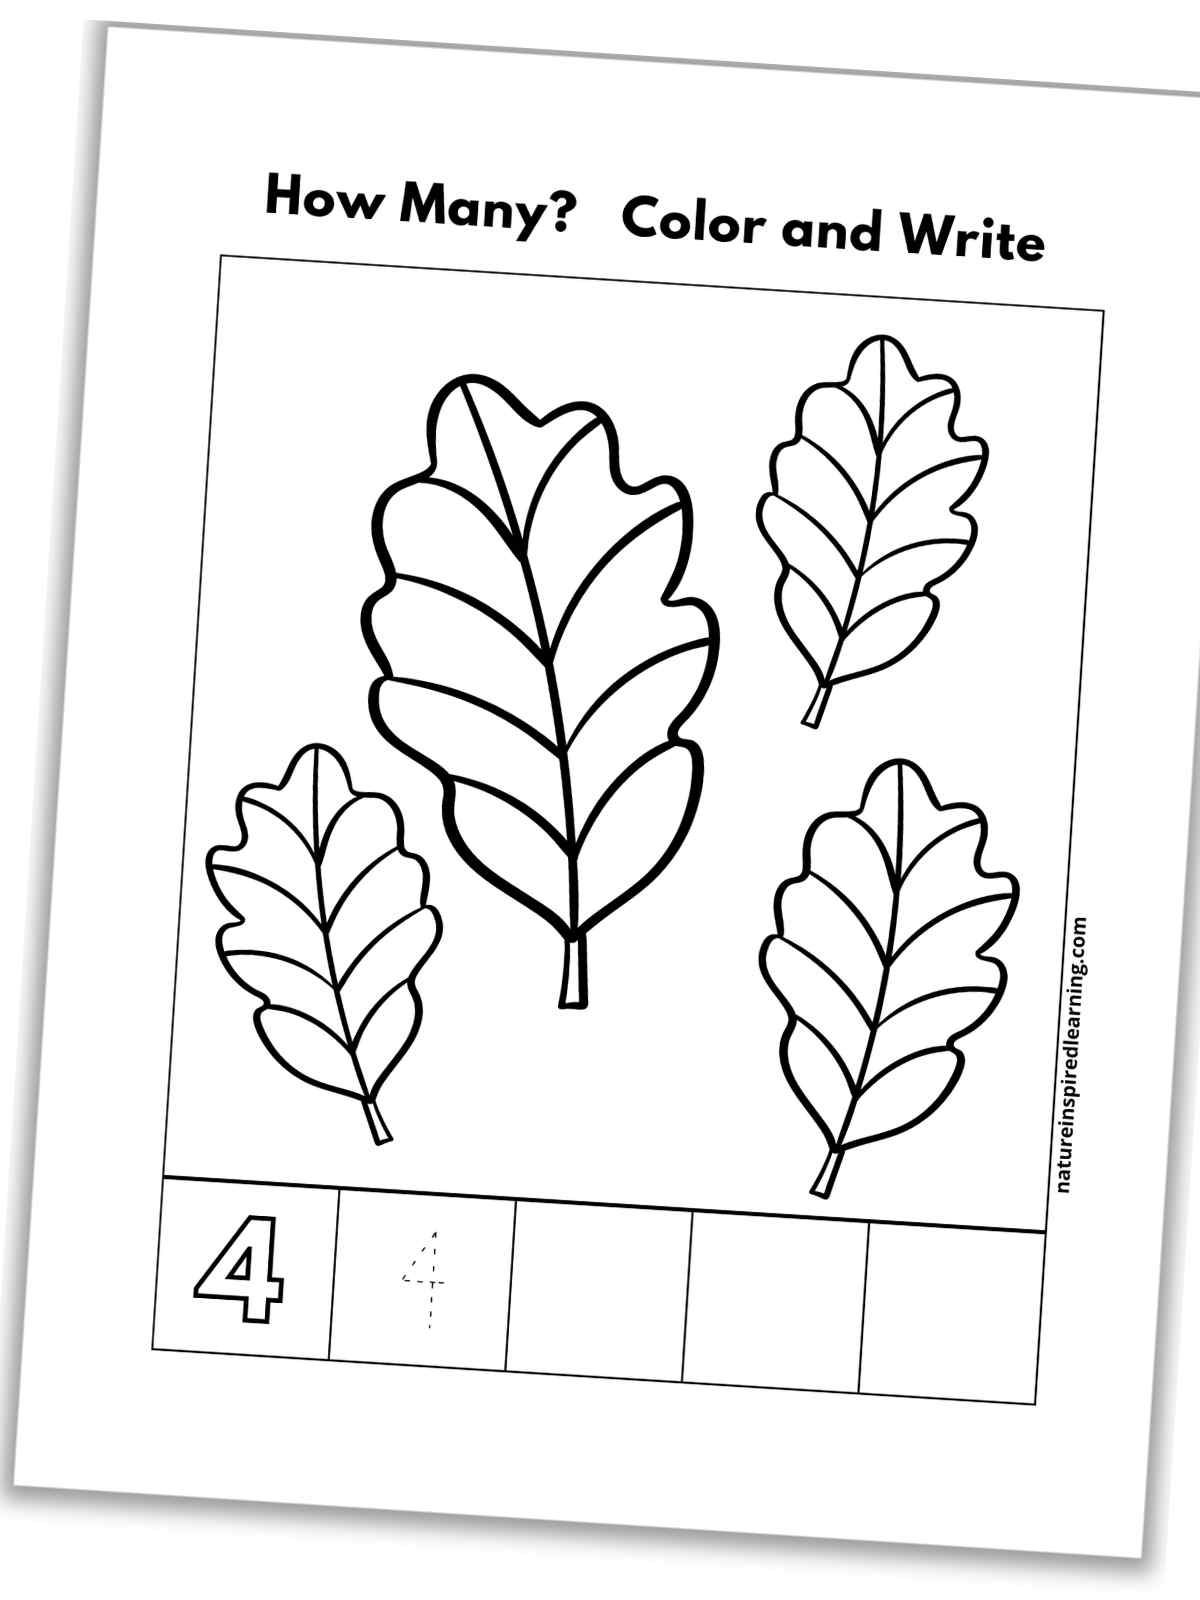 black and white number four worksheet with four leaves, outline of number 4, a traceable 4, and blank boxes slanted with a drop shadow